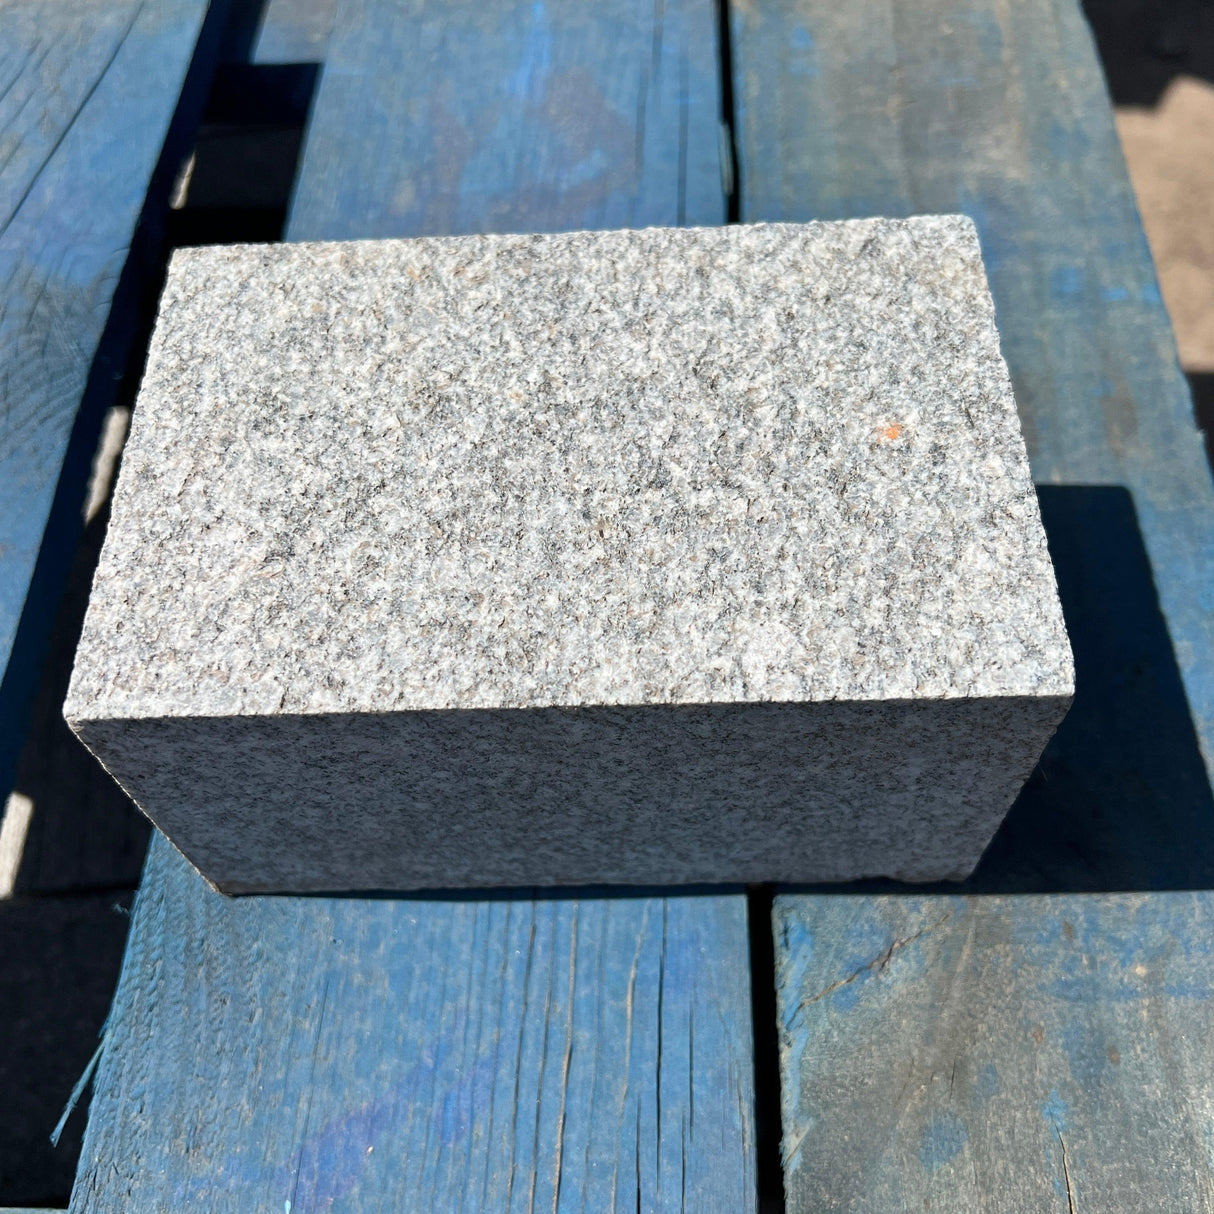 New Flamed Silver Granite Paving Cobble - Reclaimed Brick Company